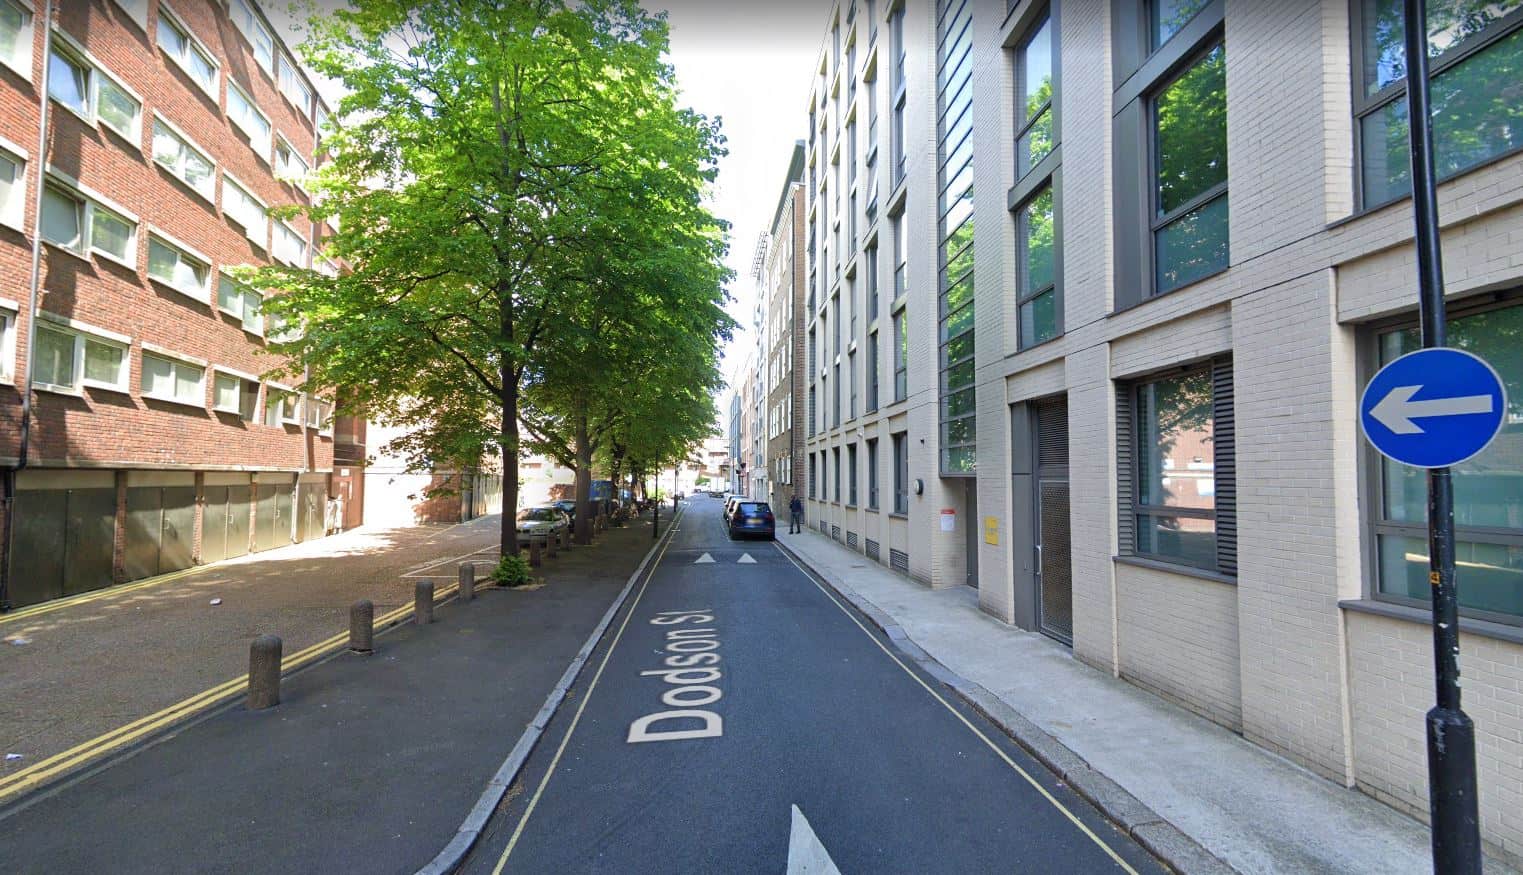 Police were called to reports of a fight on Dodson Street, SE1 on Saturday evening (Image: Google Maps)